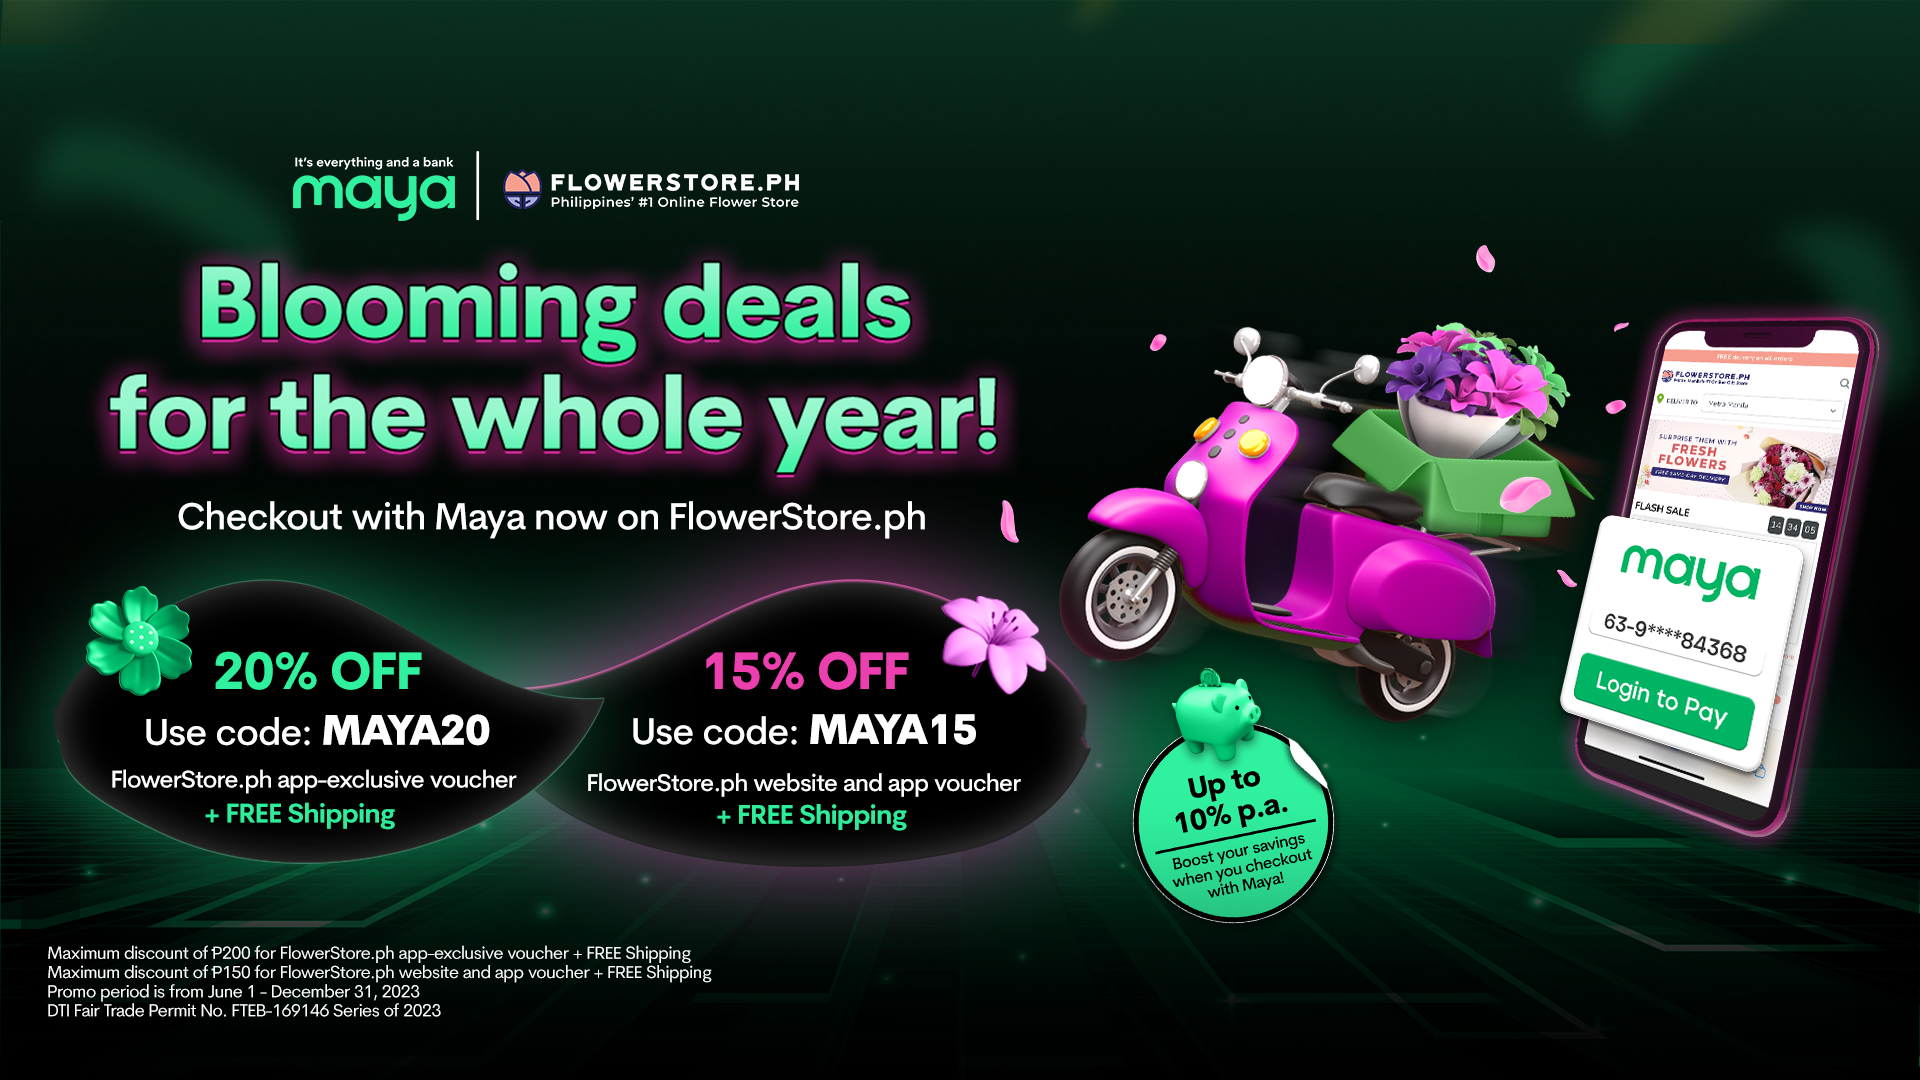 Enjoy discounts on your purchases on FlowerStore.ph!